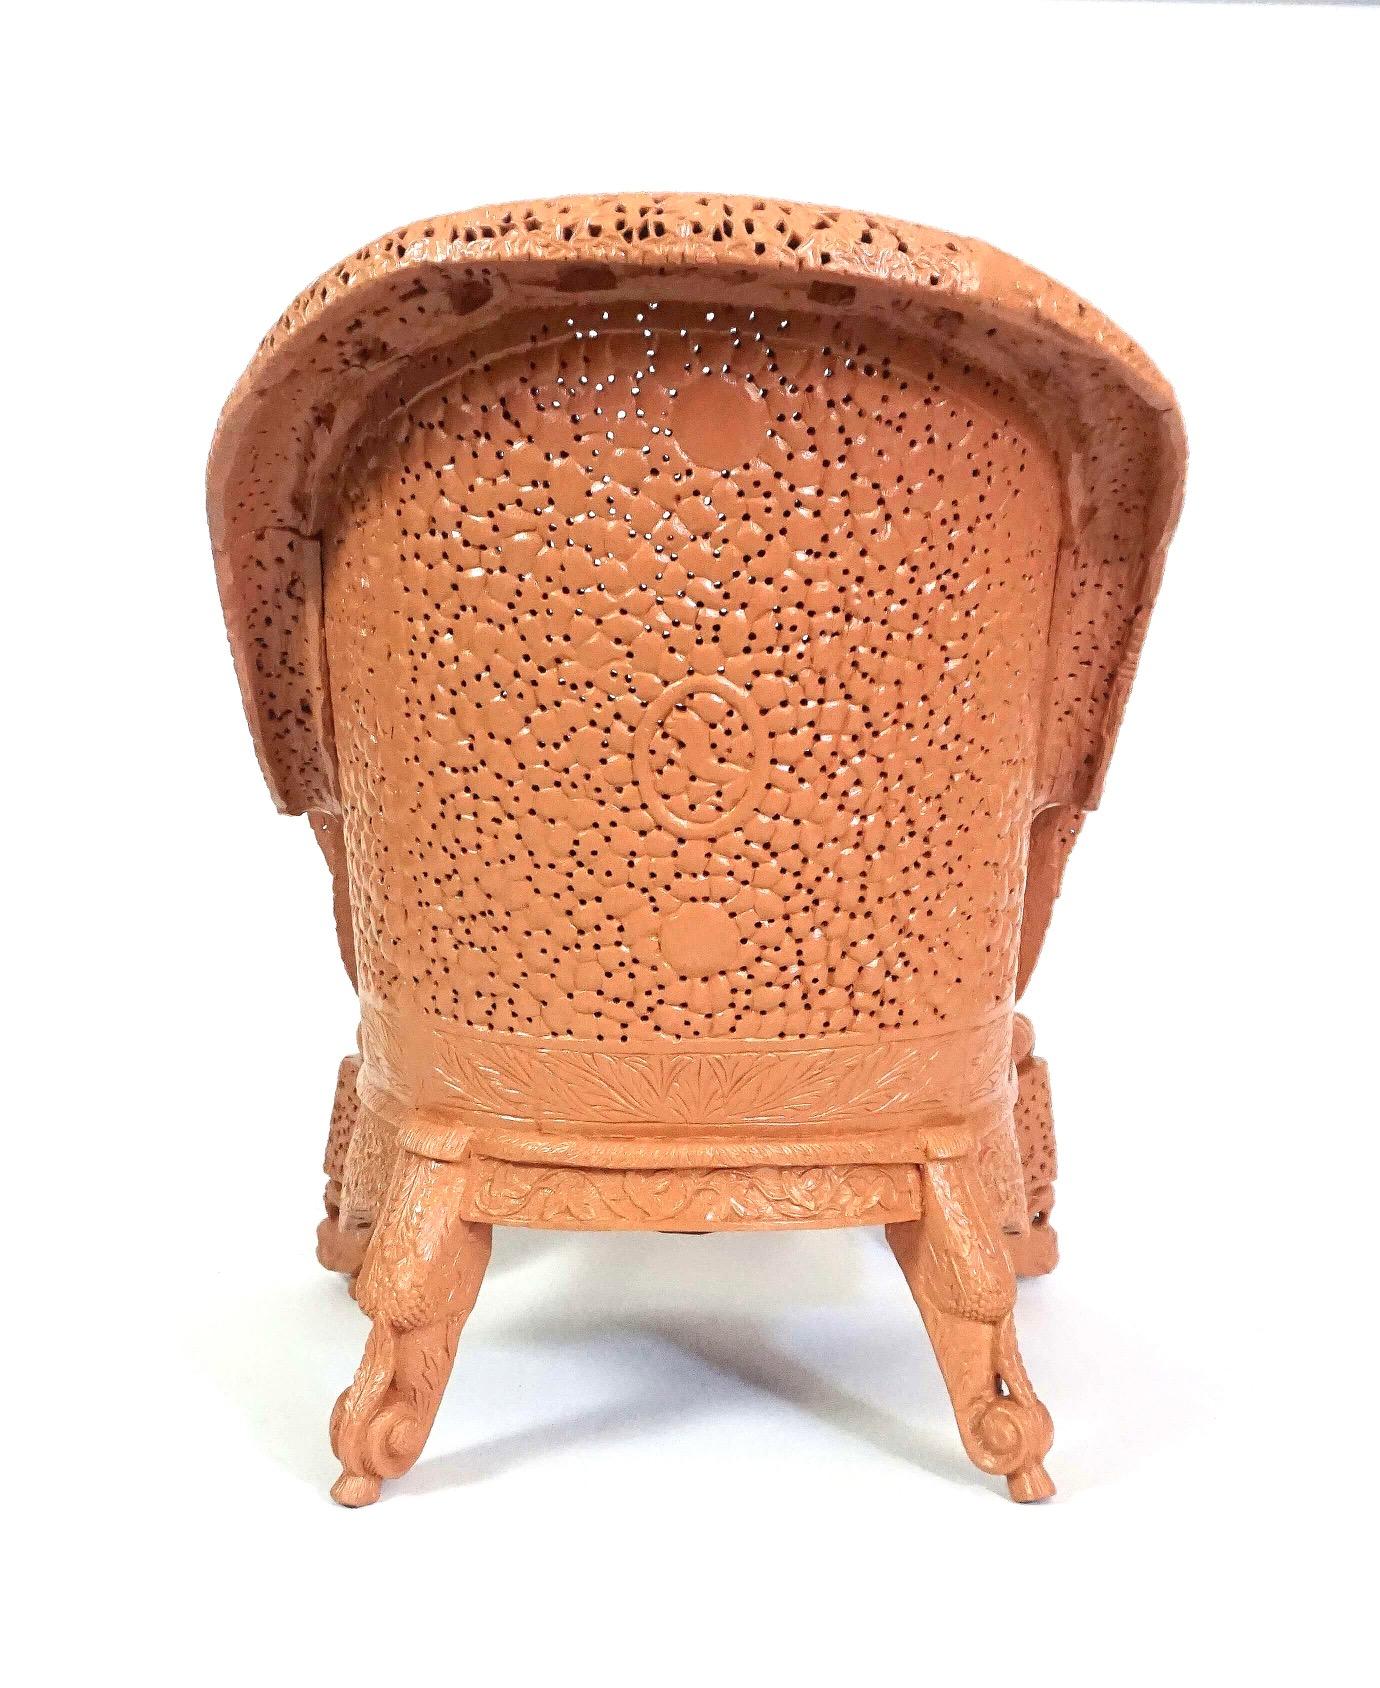 Anglo-Burmese Intricately Carved and Painted Teak Armchair, circa 1880 For Sale 8